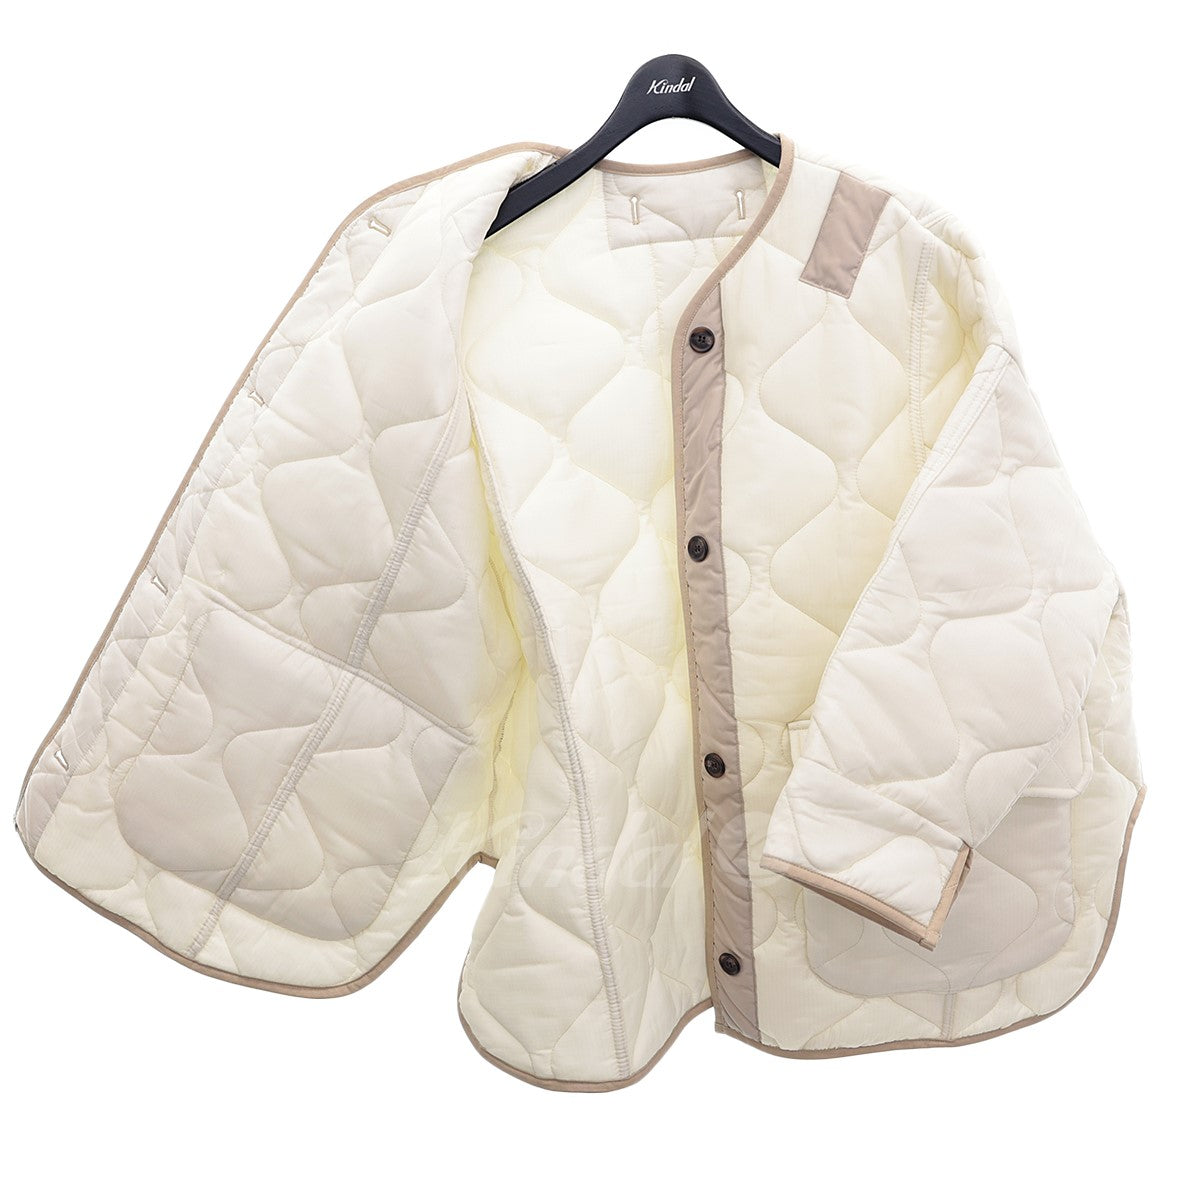 The Frankie Shop(フランキーショップ) Teddy Quilted Jacket ...